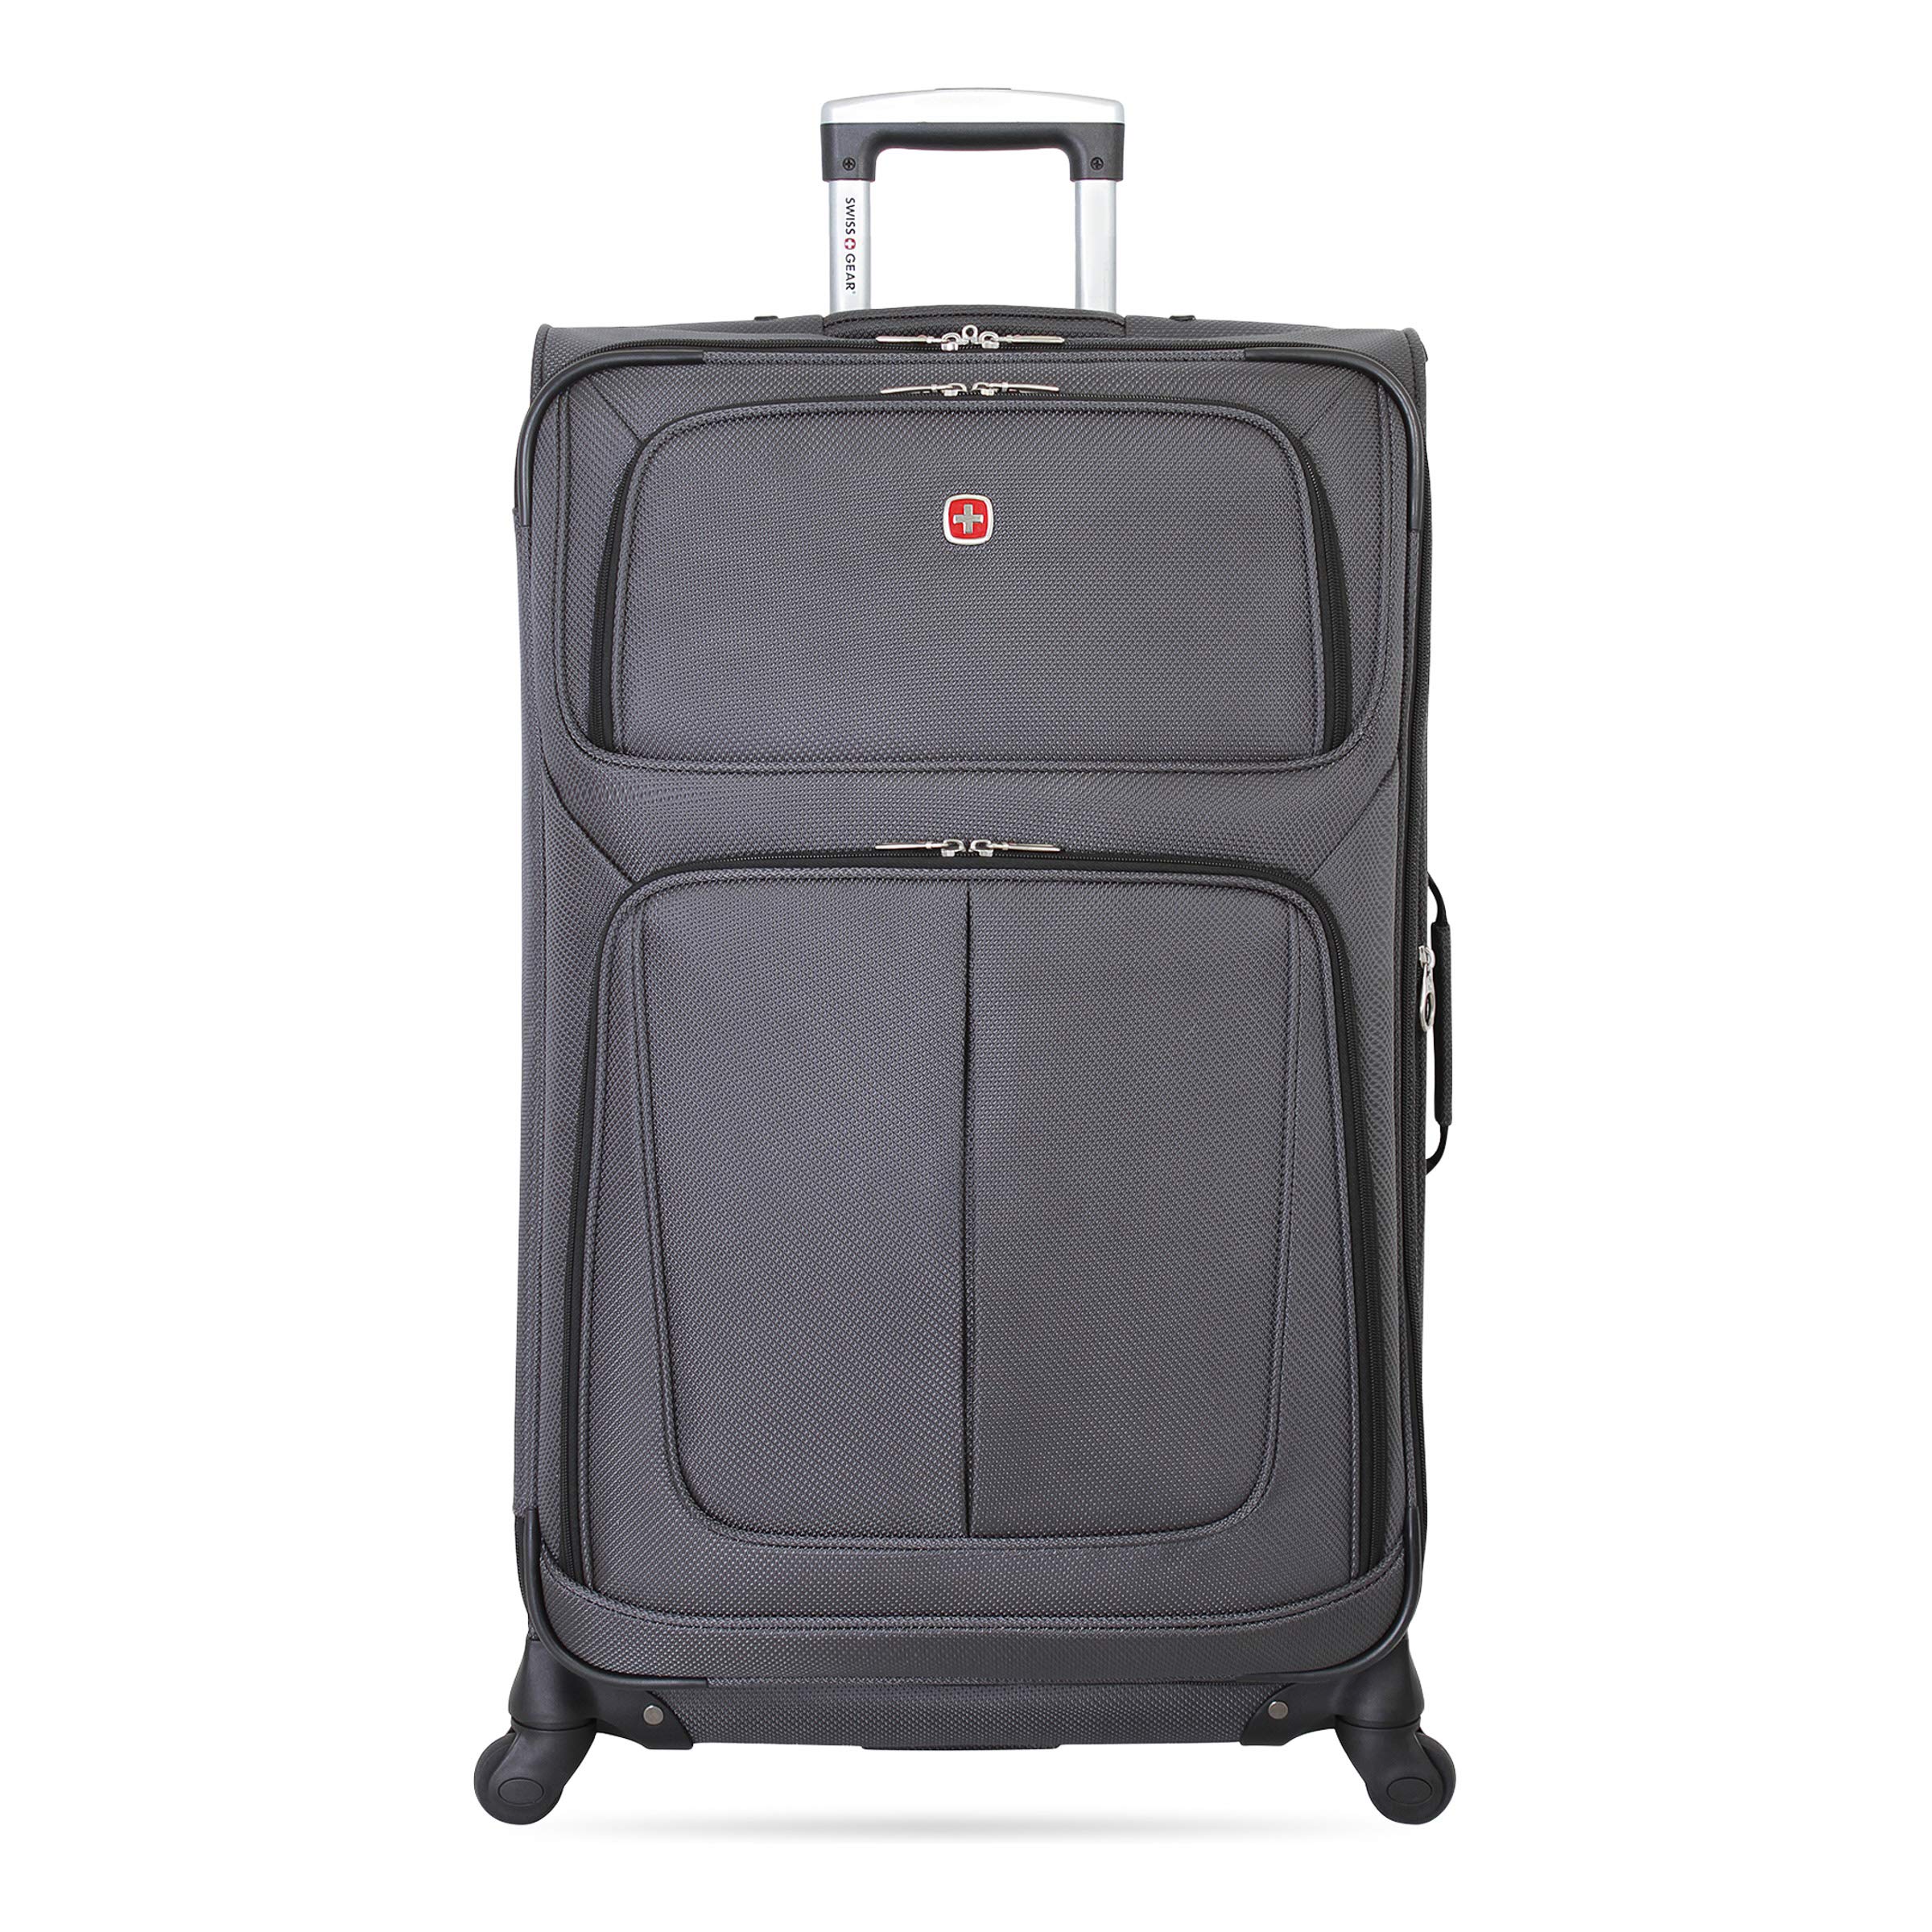 SwissGear Sion Softside Expandable Roller Luggage, Dark Grey, Checked-Large 29-Inch